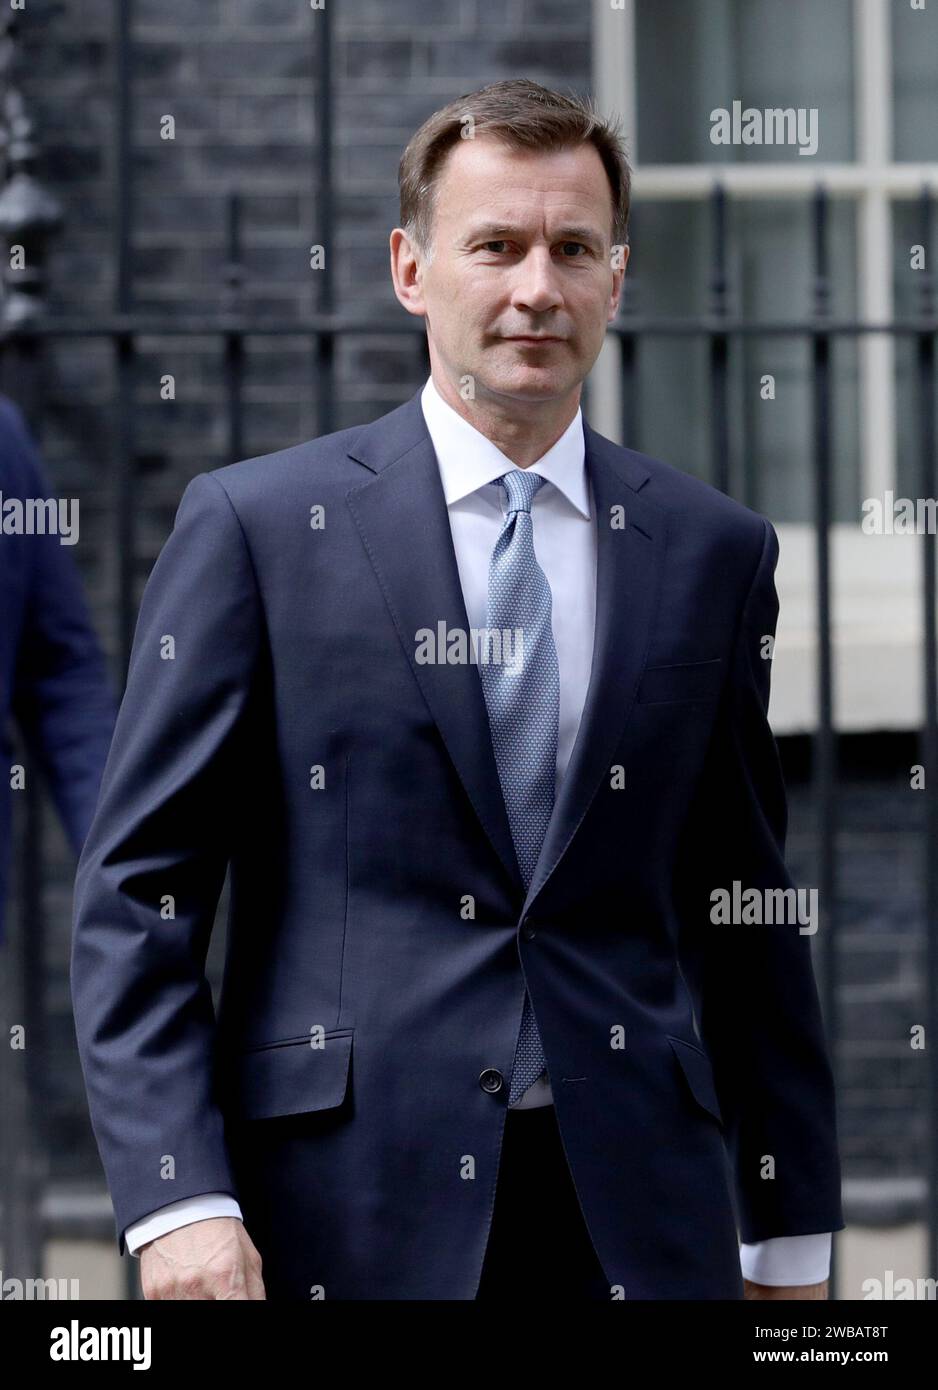 RETRANSMITTED ADDING DETAIL File photo dated 20/07/19 of Chancellor of the Exchequer Jeremy Hunt who said he is 'bitterly disappointed' after a Court of Appeal ruling gave the green light to the Loxley gas well drilling project outside Dunsfold, in his Surrey constituency. Issue date: Saturday July 20, 2019. Stock Photo